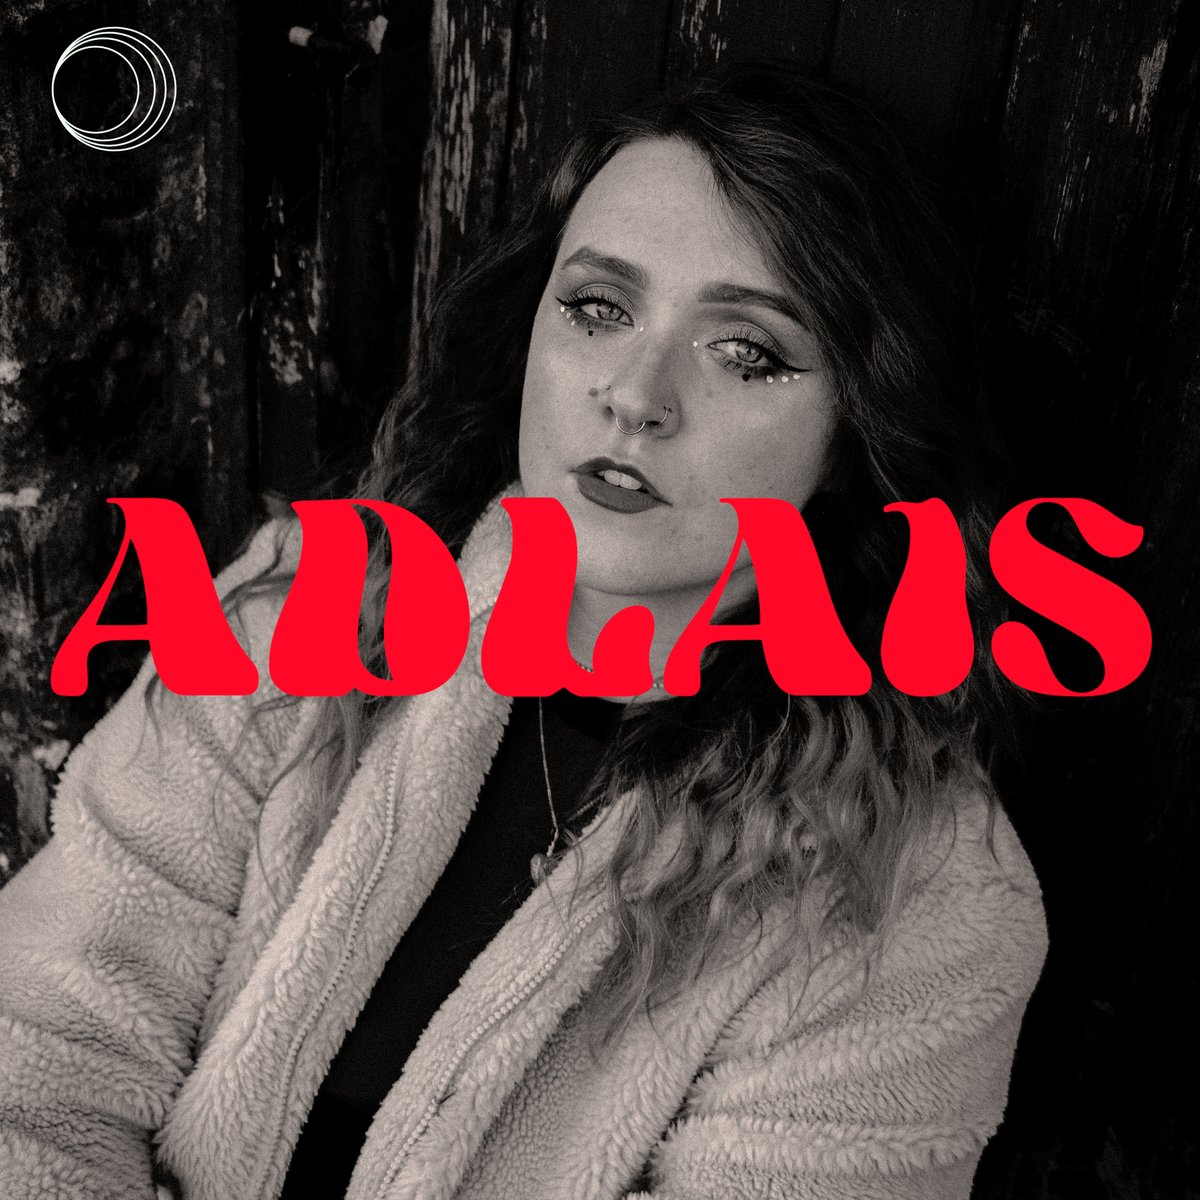 ⭕️ NEW YEAR, NEW PLAYLIST! 🖼️ The title track taken from their new EP - The Chaos this months cover artist is @foxxgloveuk ⚡️ Listen to some of the most exciting Welsh artists in the updated Adlais playlist. 🔗 Listen here: open.spotify.com/playlist/0H9eV…